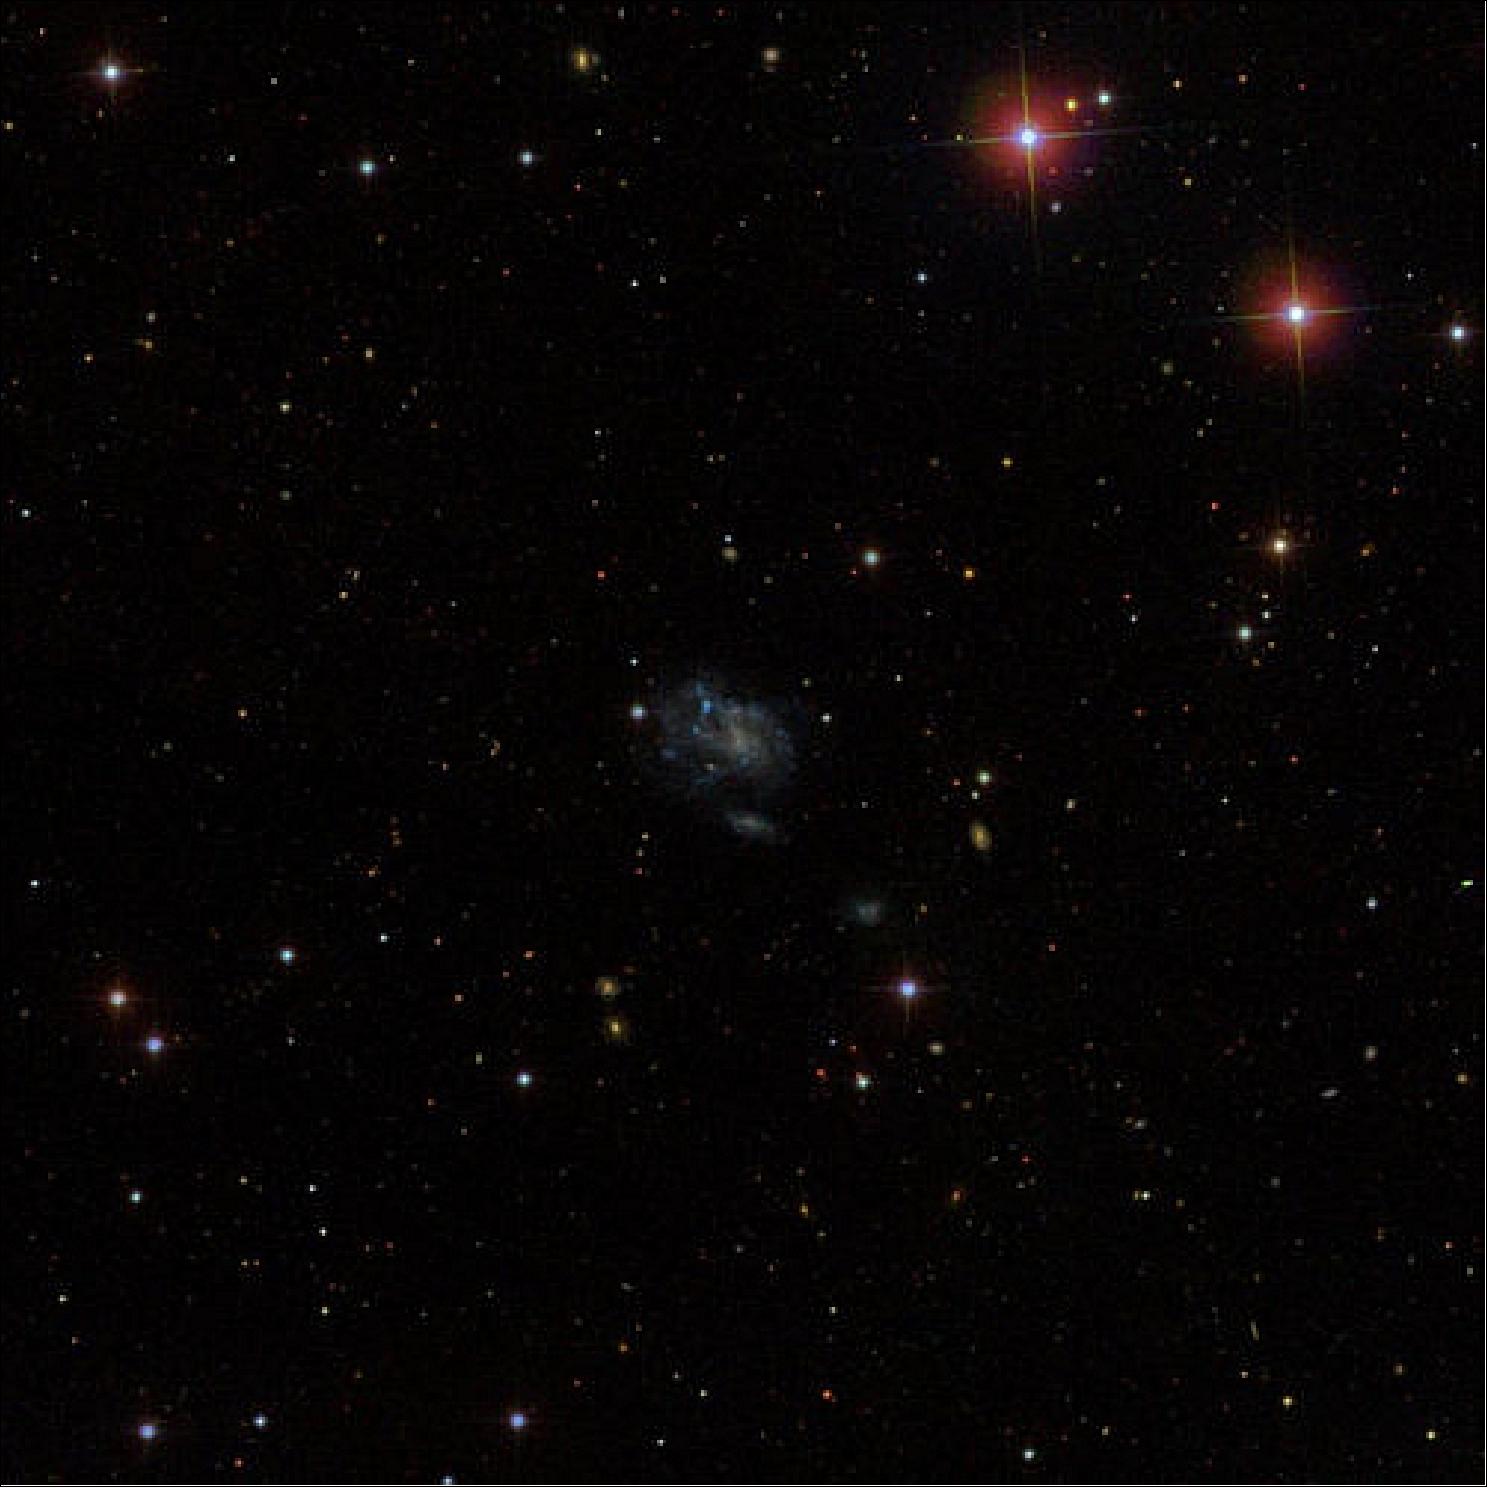 Figure 29: The supernova—known as SN 2018oh—is located in a spiral galaxy called UGC 4780 in the constellation Cancer at a distance of more than 170 million light years (image credit: NASA)